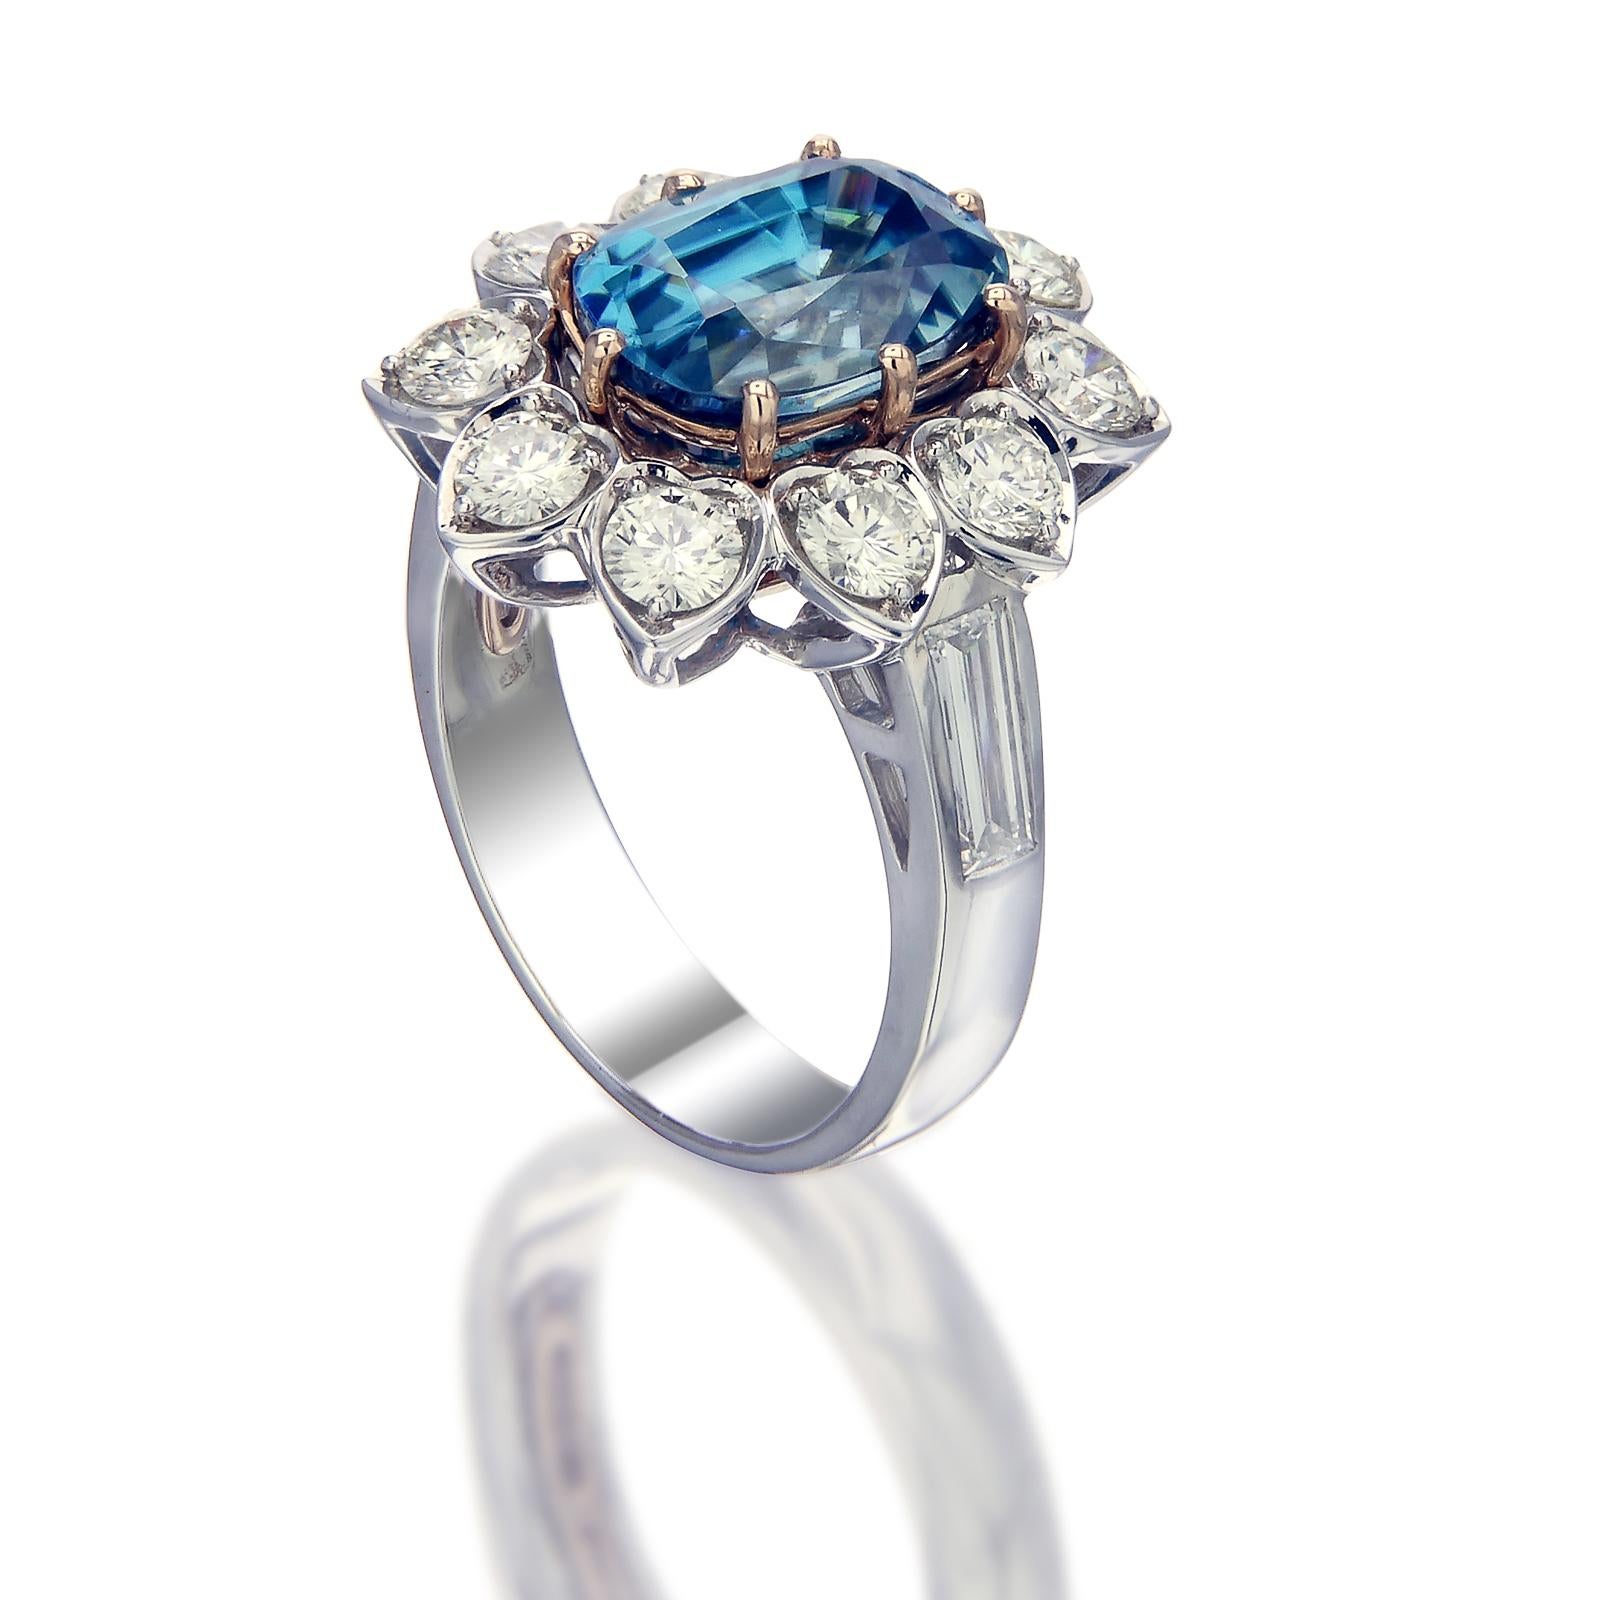 A 5.35-carat translucent blue zircon is the centerpiece of this 18k gold and palladium ring. The gem is surrounded by 1.74-carat round white diamonds in pear-shaped settings. The shank of the ring is set with emerald baguette diamonds on either